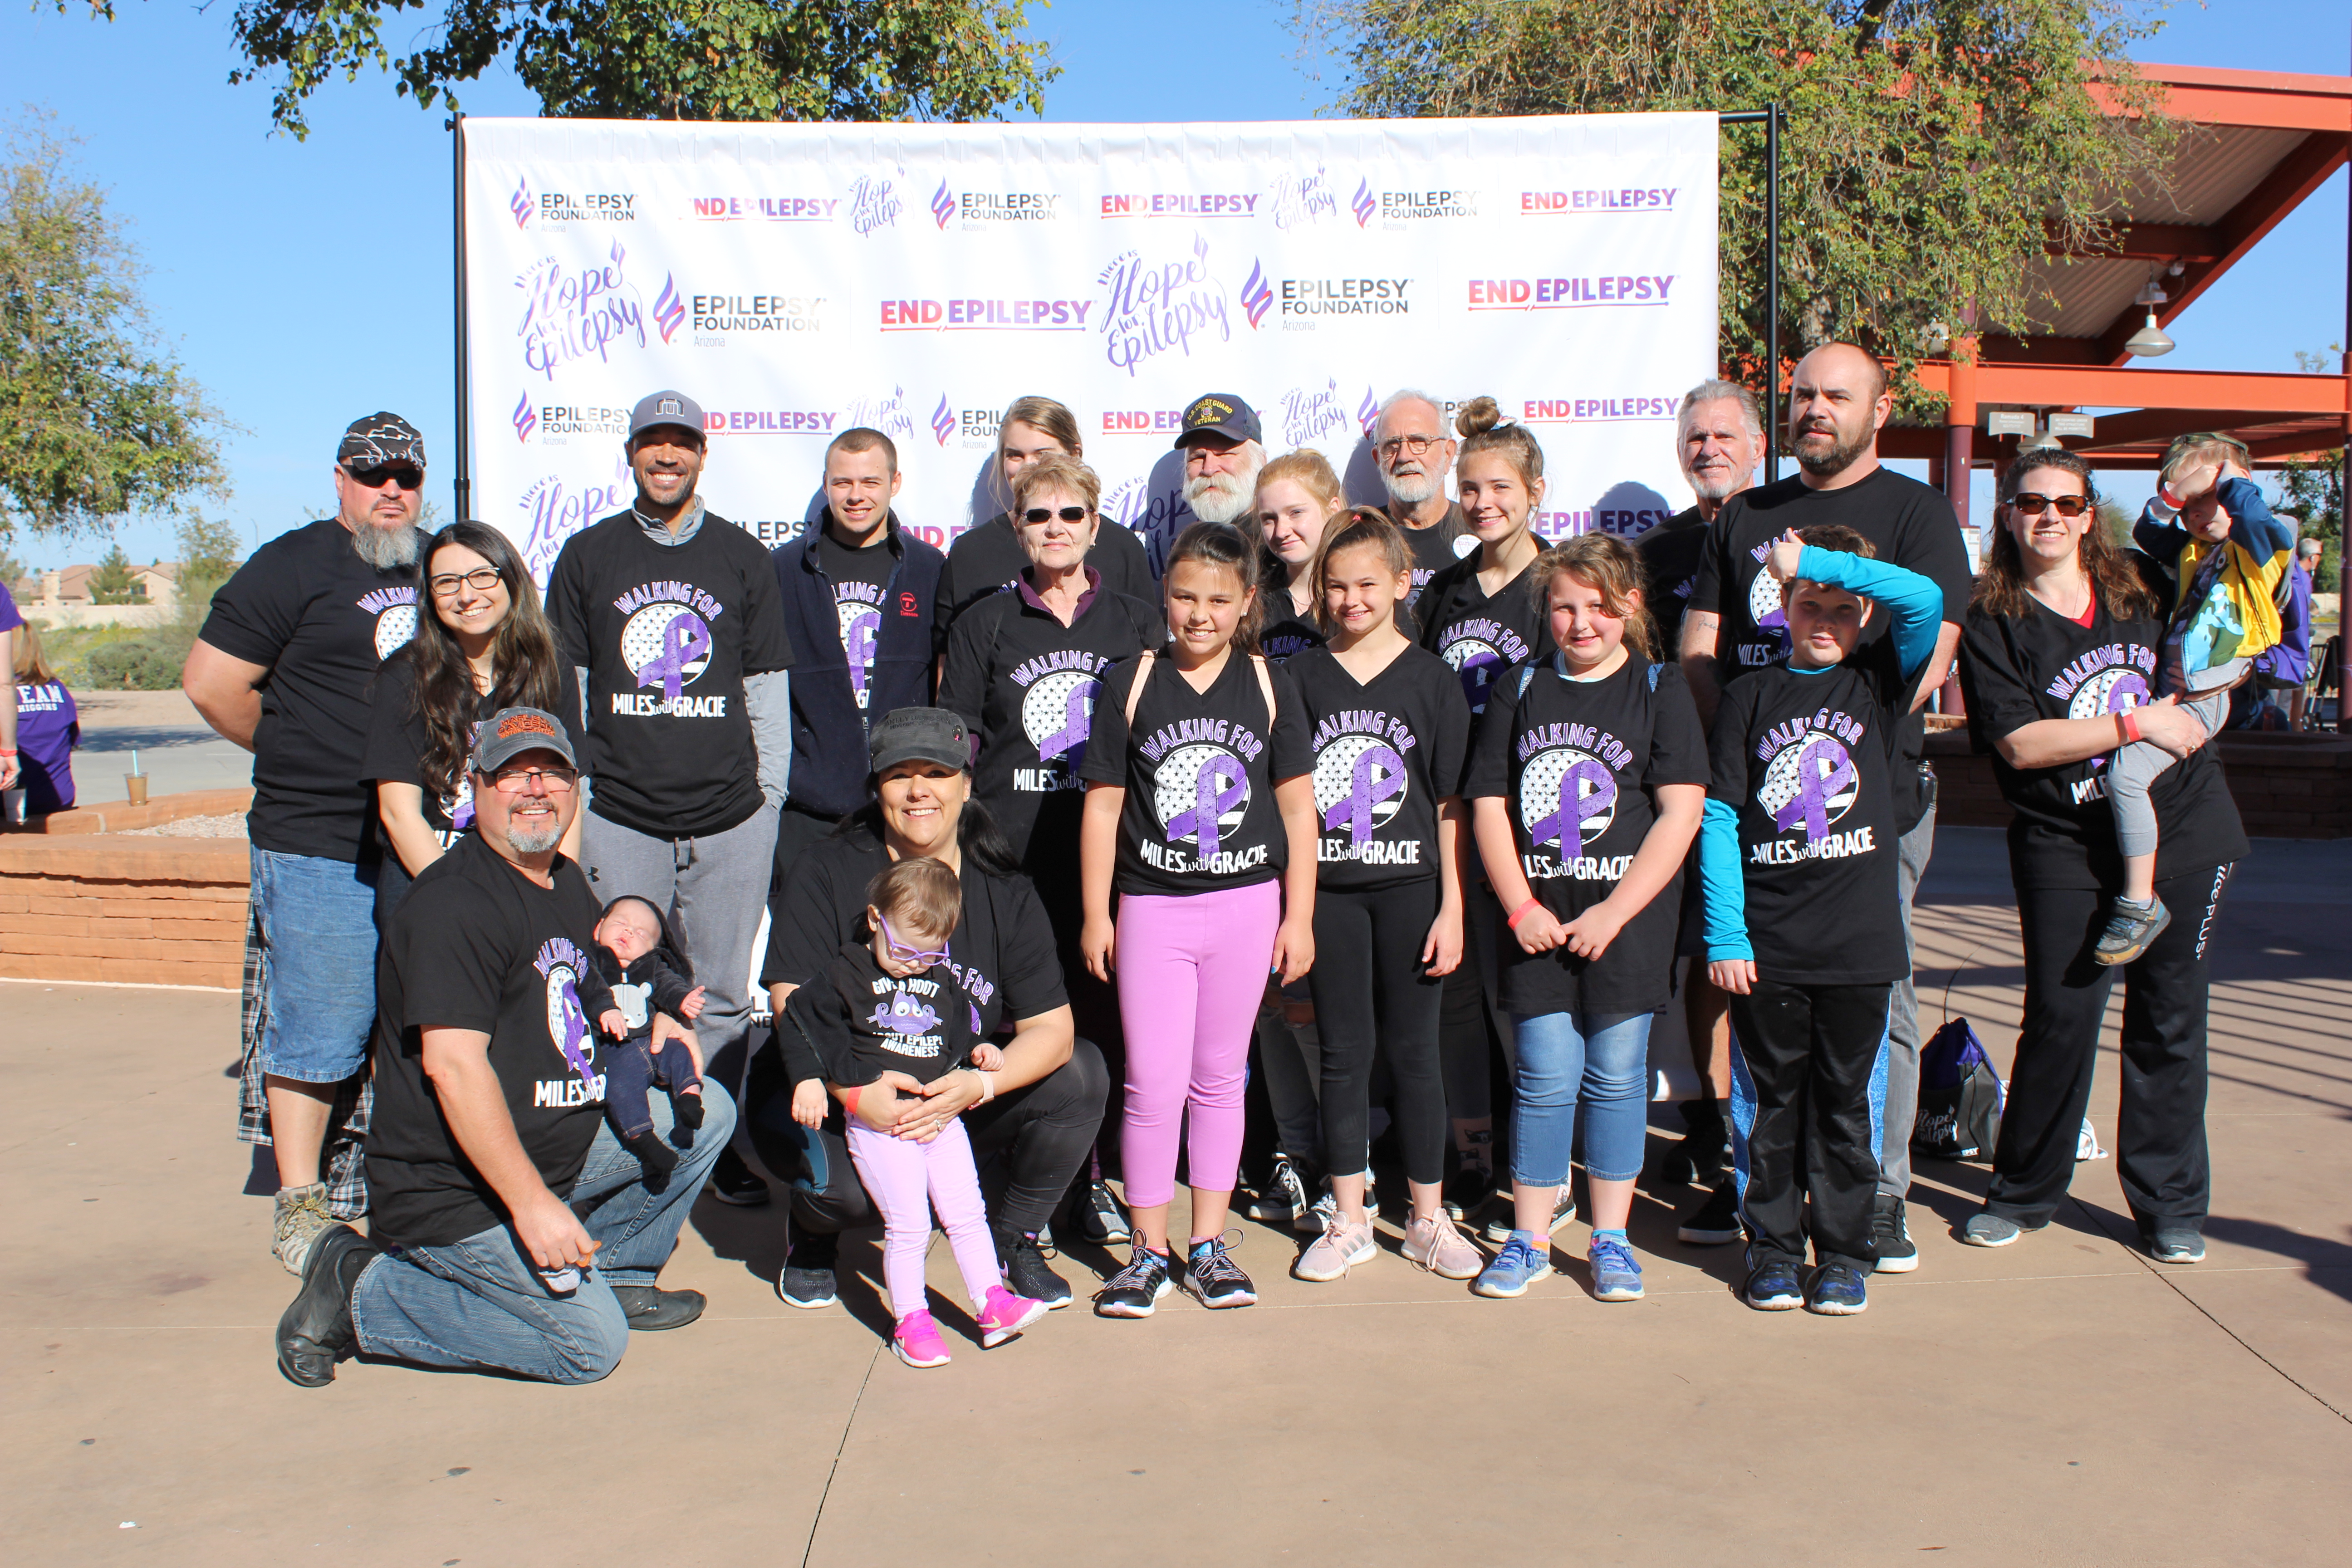 Walk to End Epilepsy – JOIN US IN THIS NATIONWIDE MOVEMENT5184 x 3456